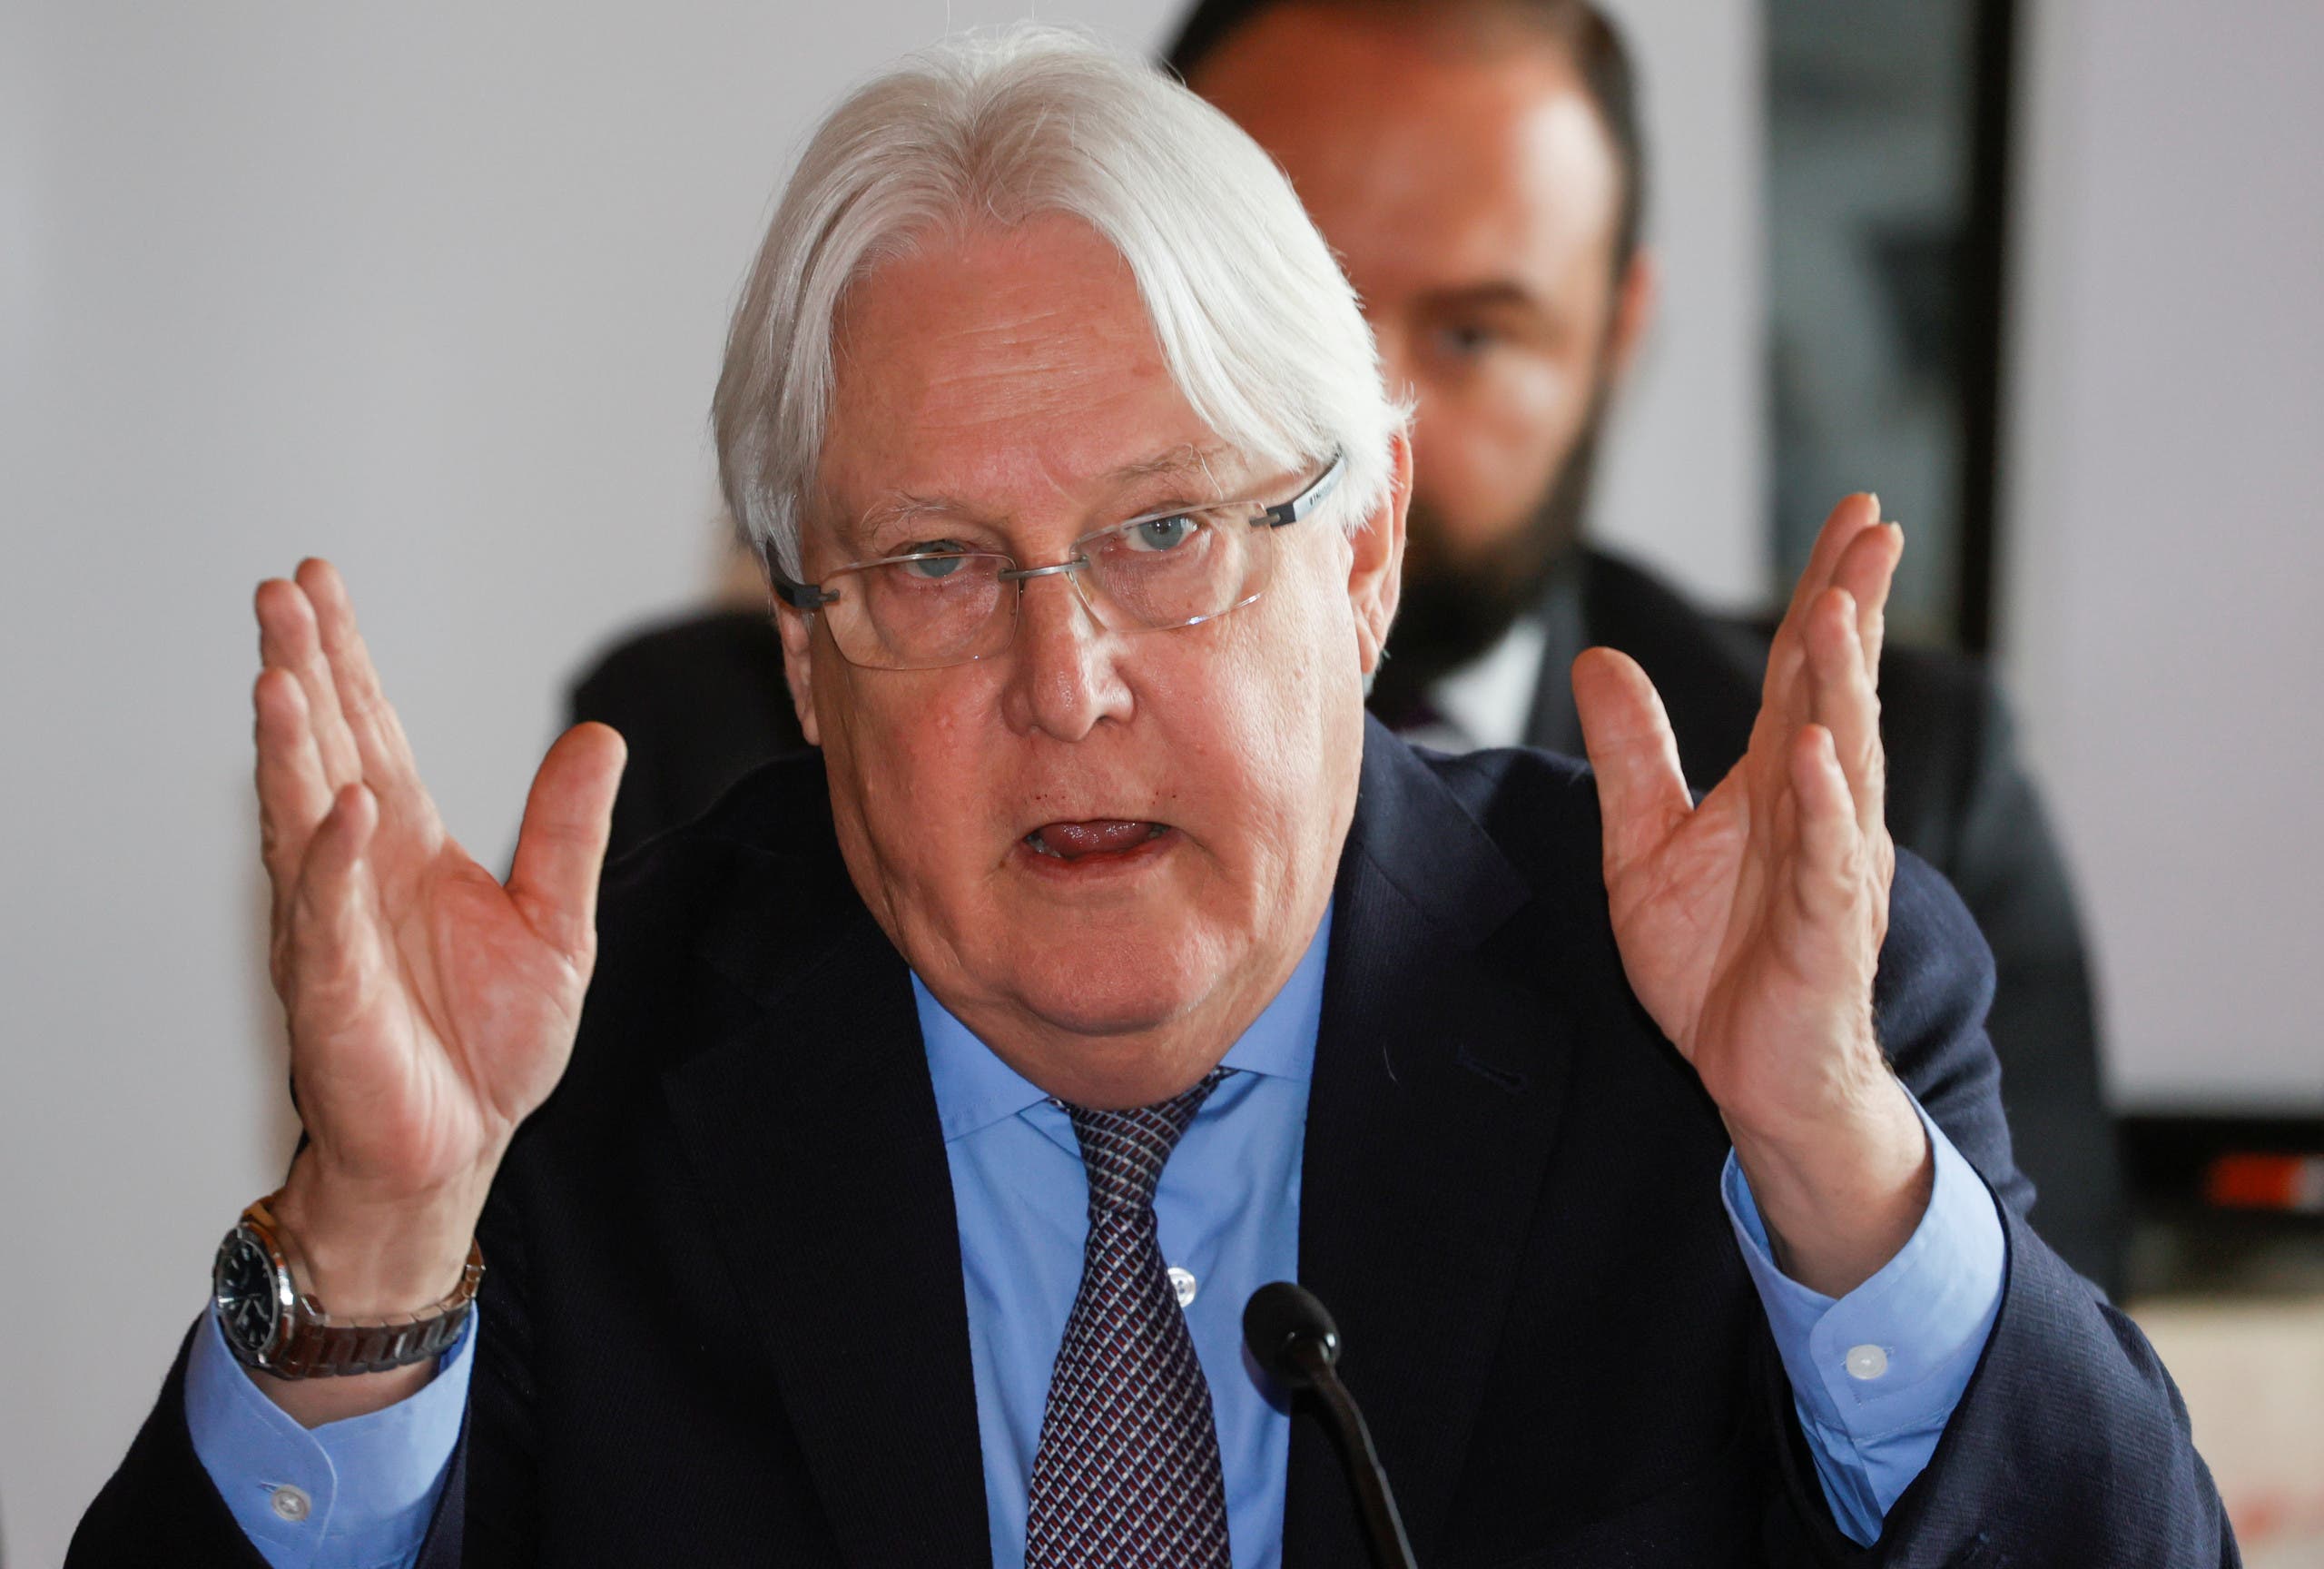 Martin Griffiths, United Nations Special Envoy for Yemen speaks as he attends the closing plenary of the fourth meeting of the Supervisory Committee on the Implementation of the Prisoners' Exchange Agreement in Yemen, in Glion, Switzerland, September 27, 2020. (Reuters)